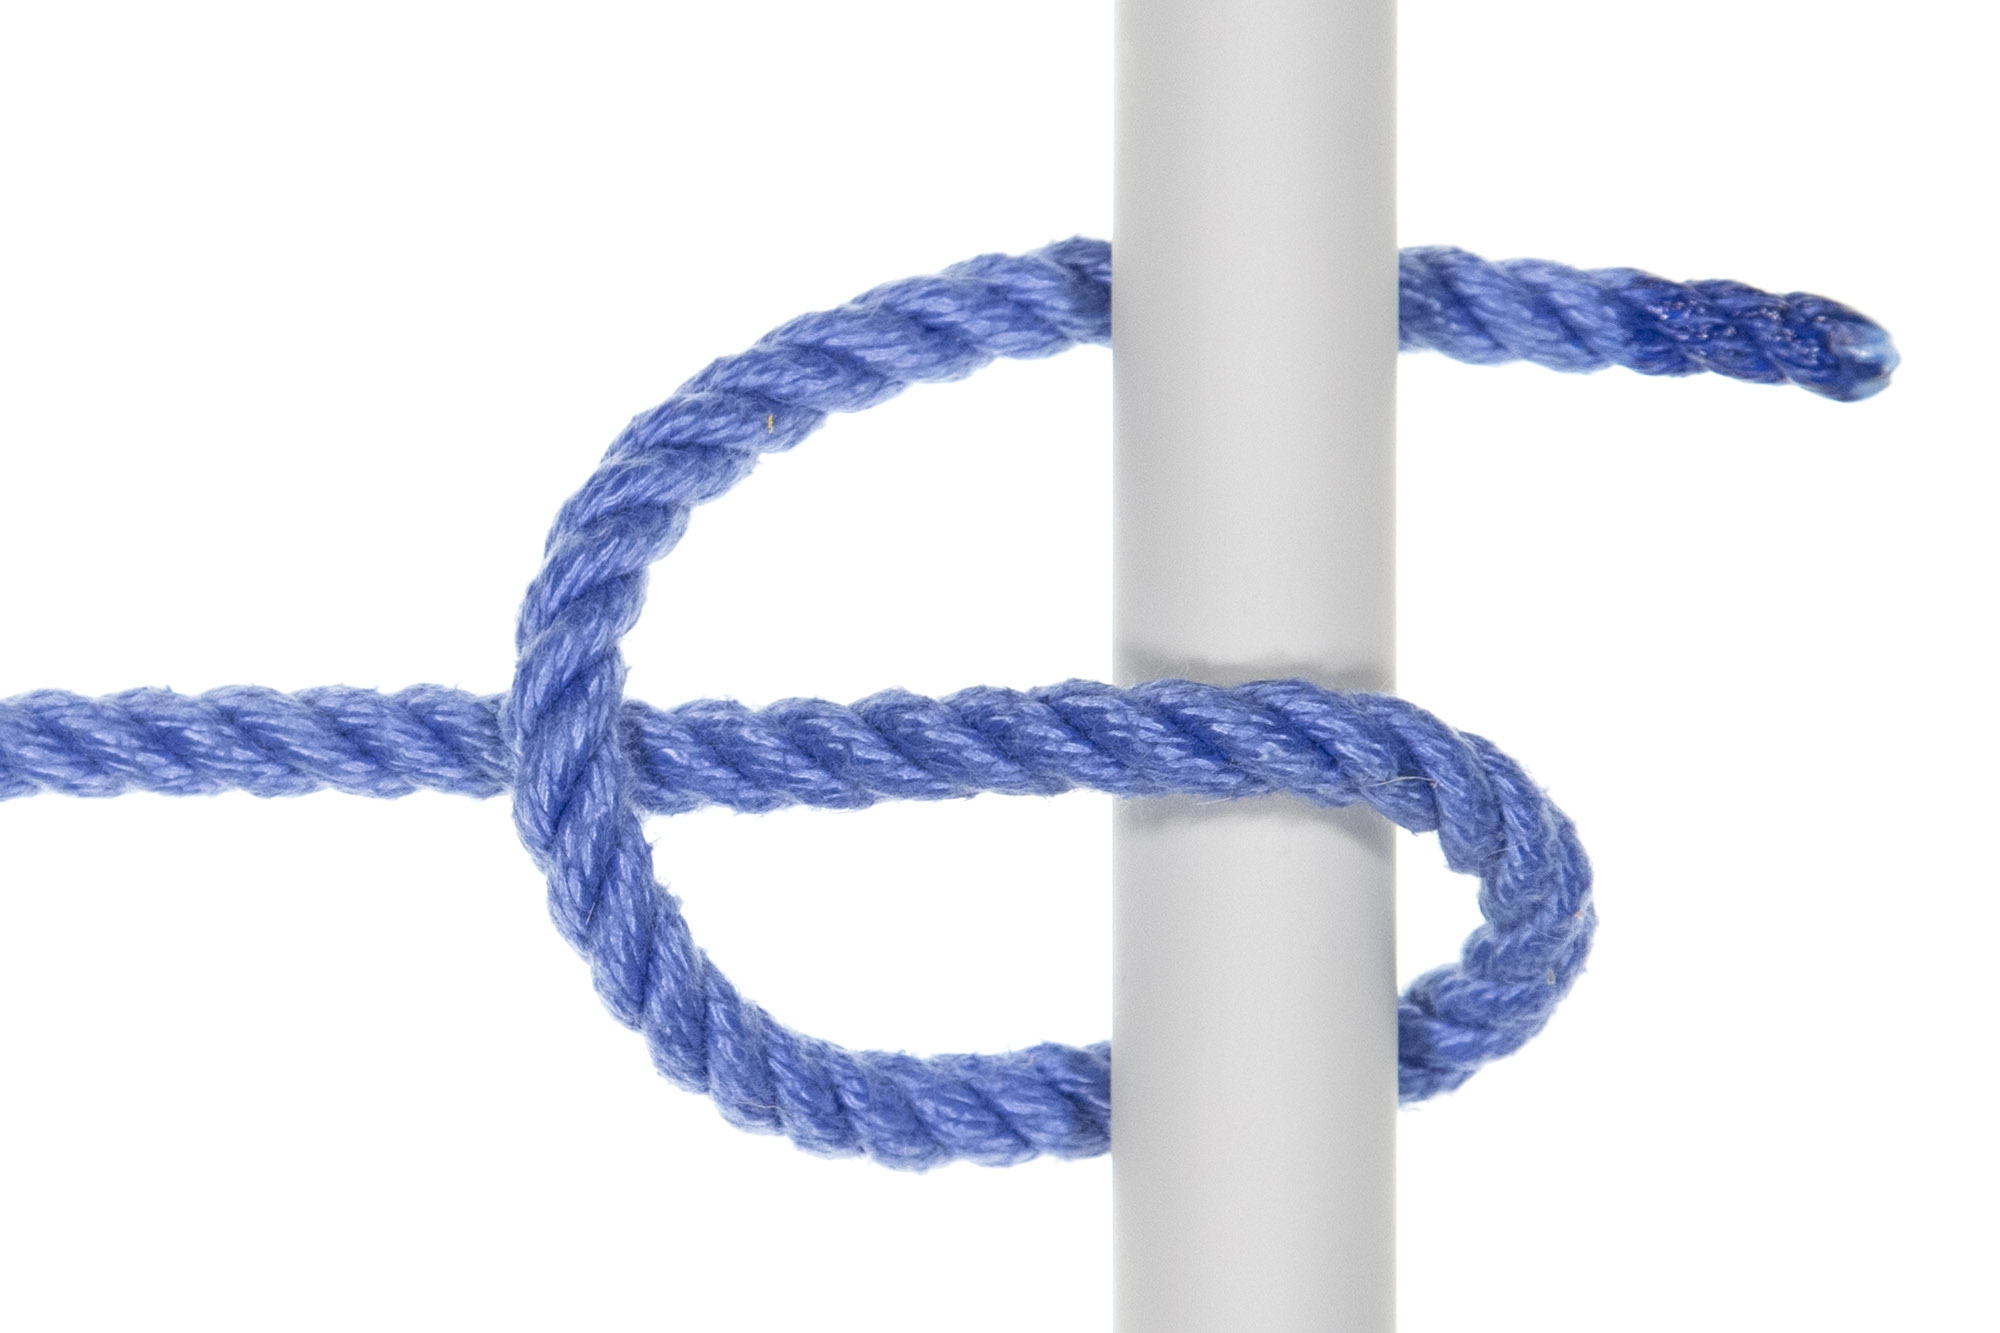 A blue rope that goes around a gray pole, over itself, and then under the pole.